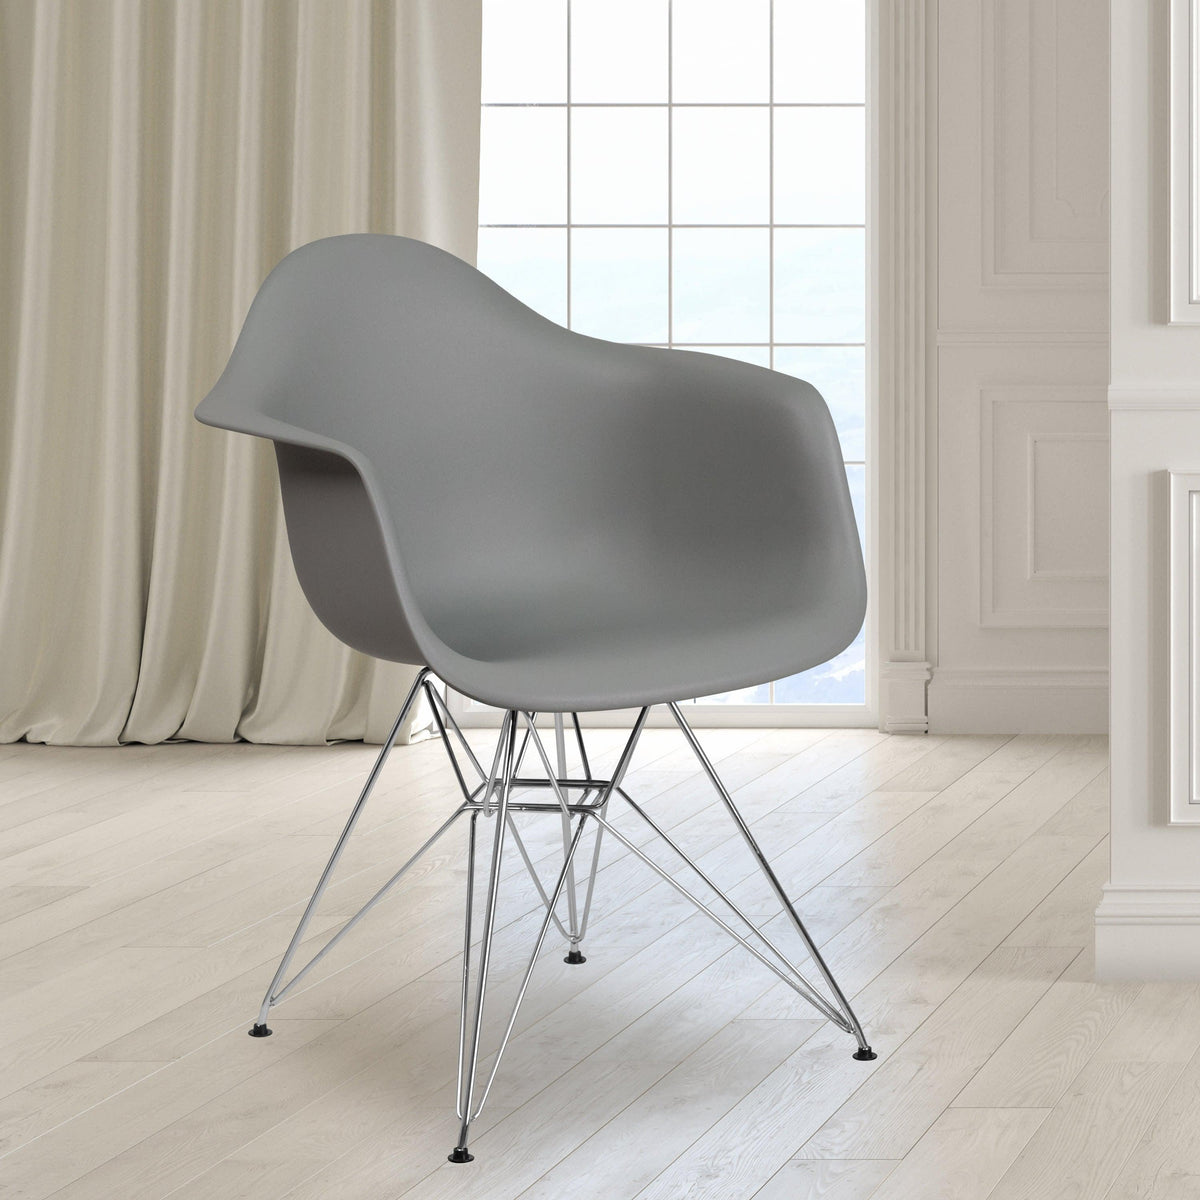 Moss Gray |#| Moss Gray Plastic Chair with Arms and Chrome Base - Accent & Side Chair